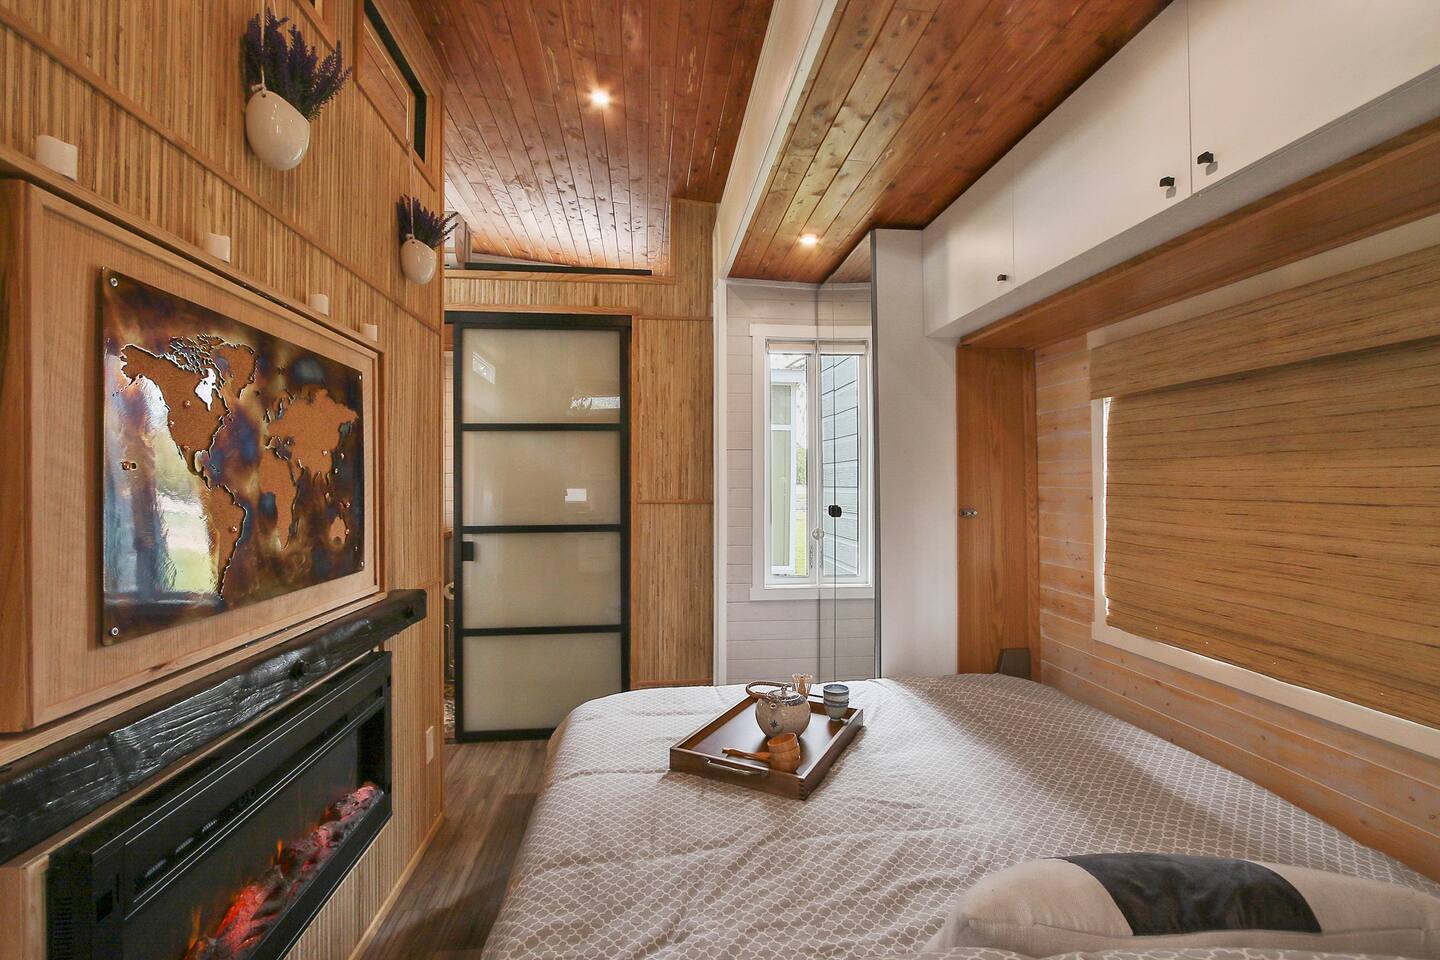 Cozy bed near wooden wall with fireplace and world map on it